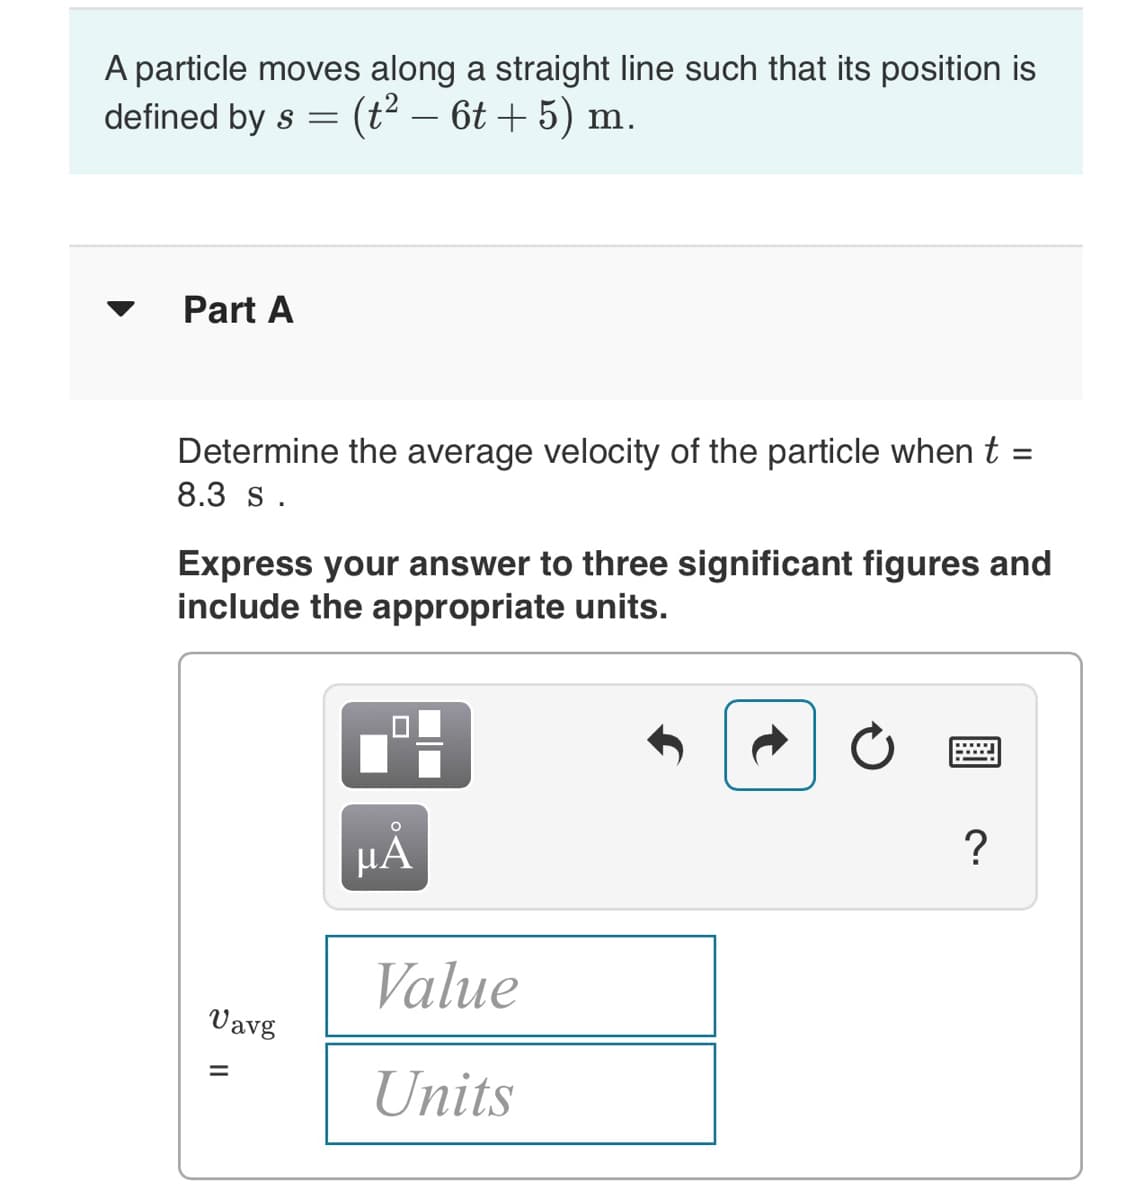 A particle moves along a straight line such that its position is
defined by s =
(t2 – 6t + 5) m.
Part A
Determine the average velocity of the particle when t =
8.3 s.
Express your answer to three significant figures and
include the appropriate units.
НА
?
Value
Vavg
Units
II
